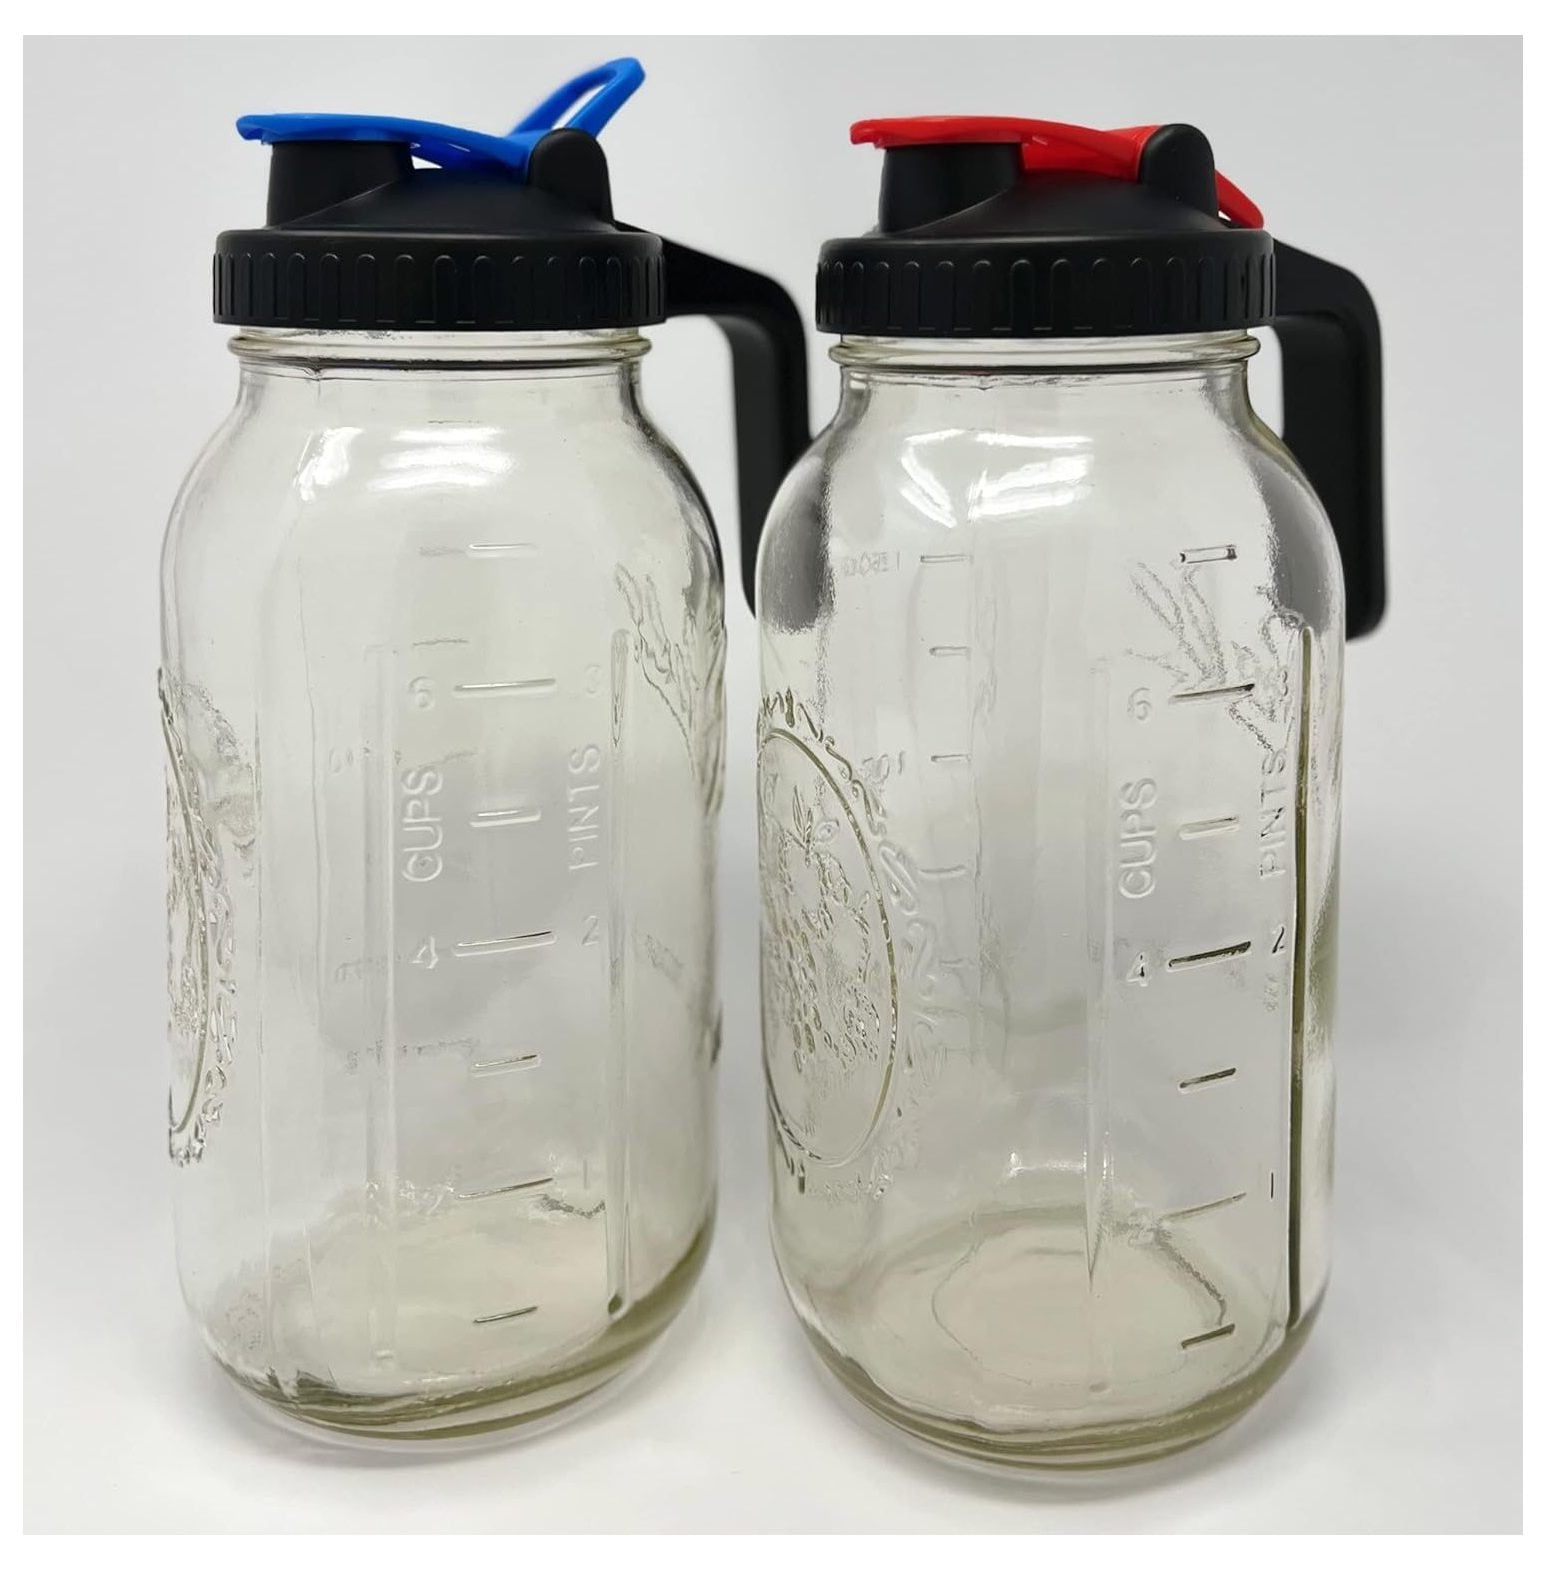 2 Pack 64 oz Sun Tea Pitcher, Half Gallon Mason Jar Pitcher with Wide Mouth  Airtight Lid for Ice Tea, Cold Brew Coffee, Fridge Water, Breast Milk